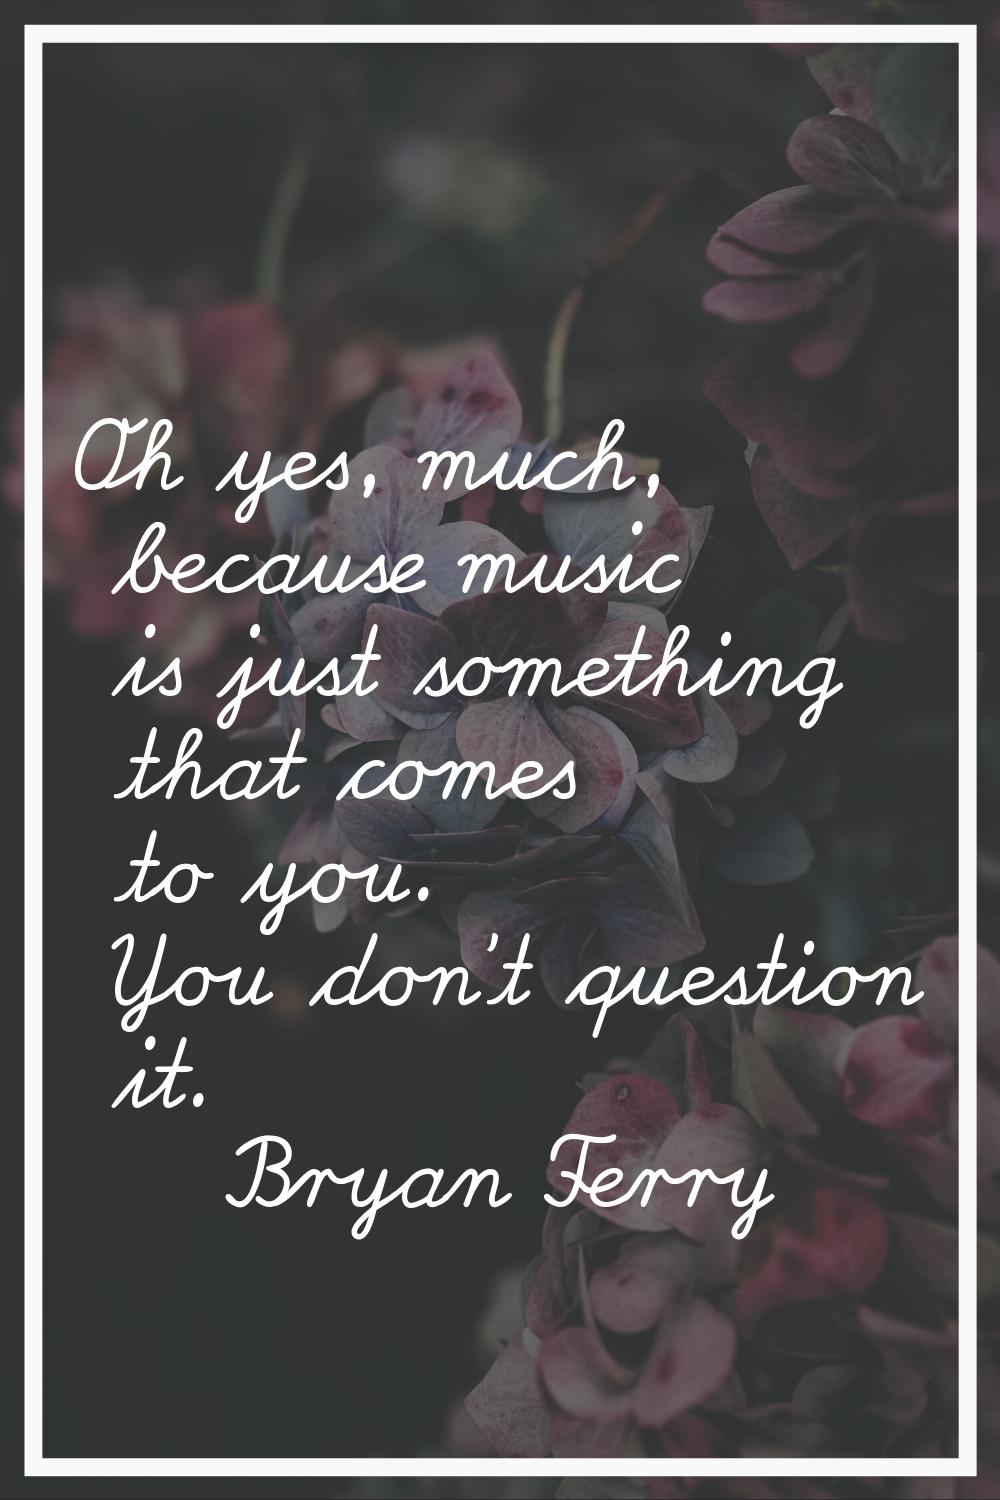 Oh yes, much, because music is just something that comes to you. You don't question it.